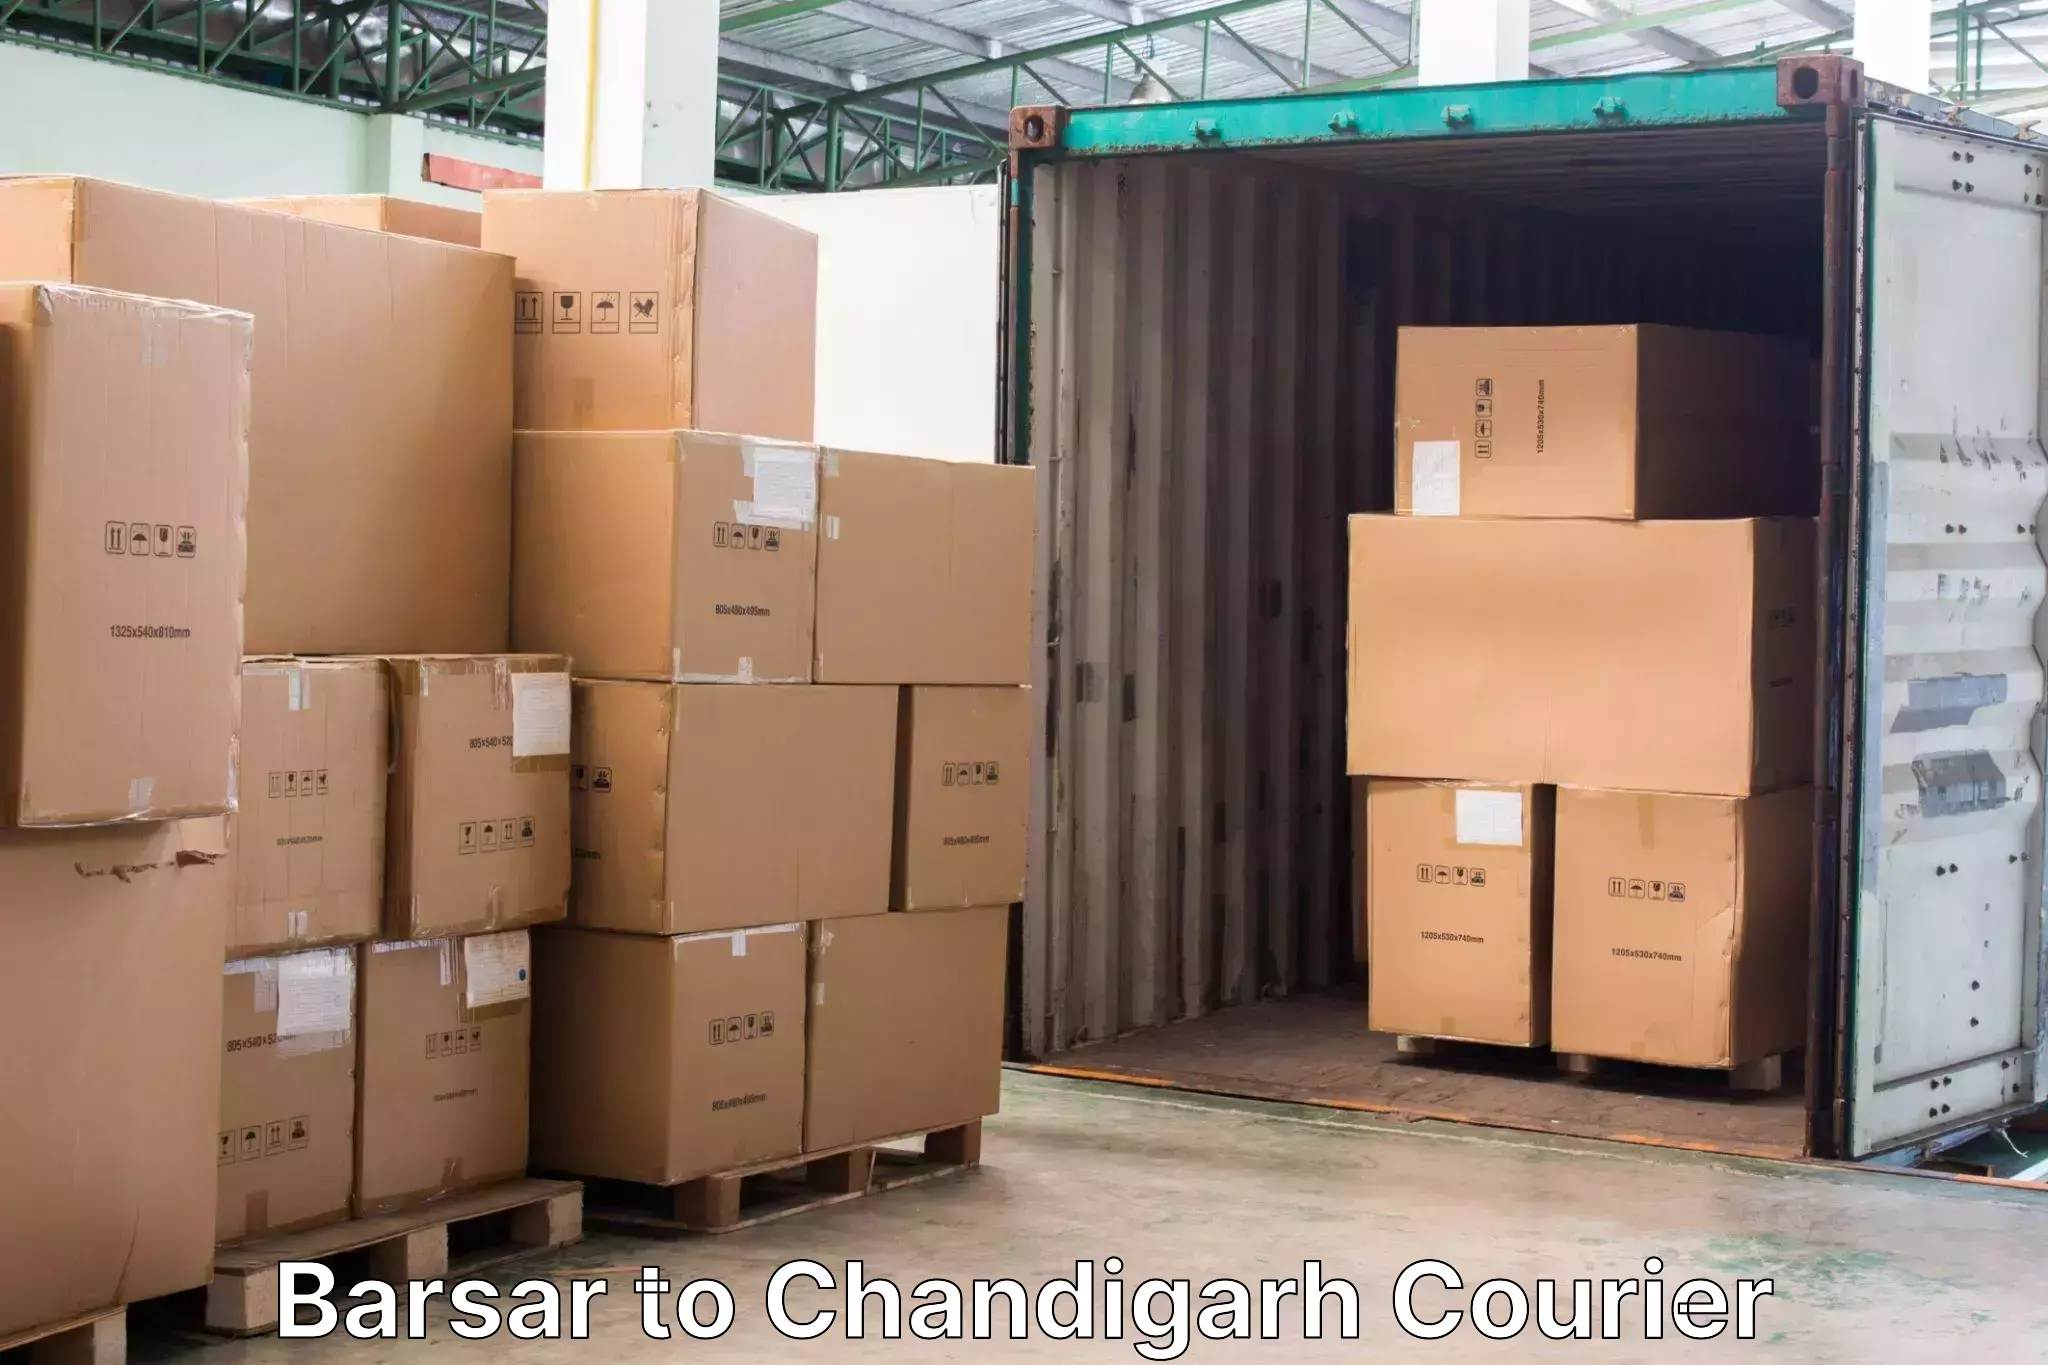 Instant baggage transport quote Barsar to Chandigarh